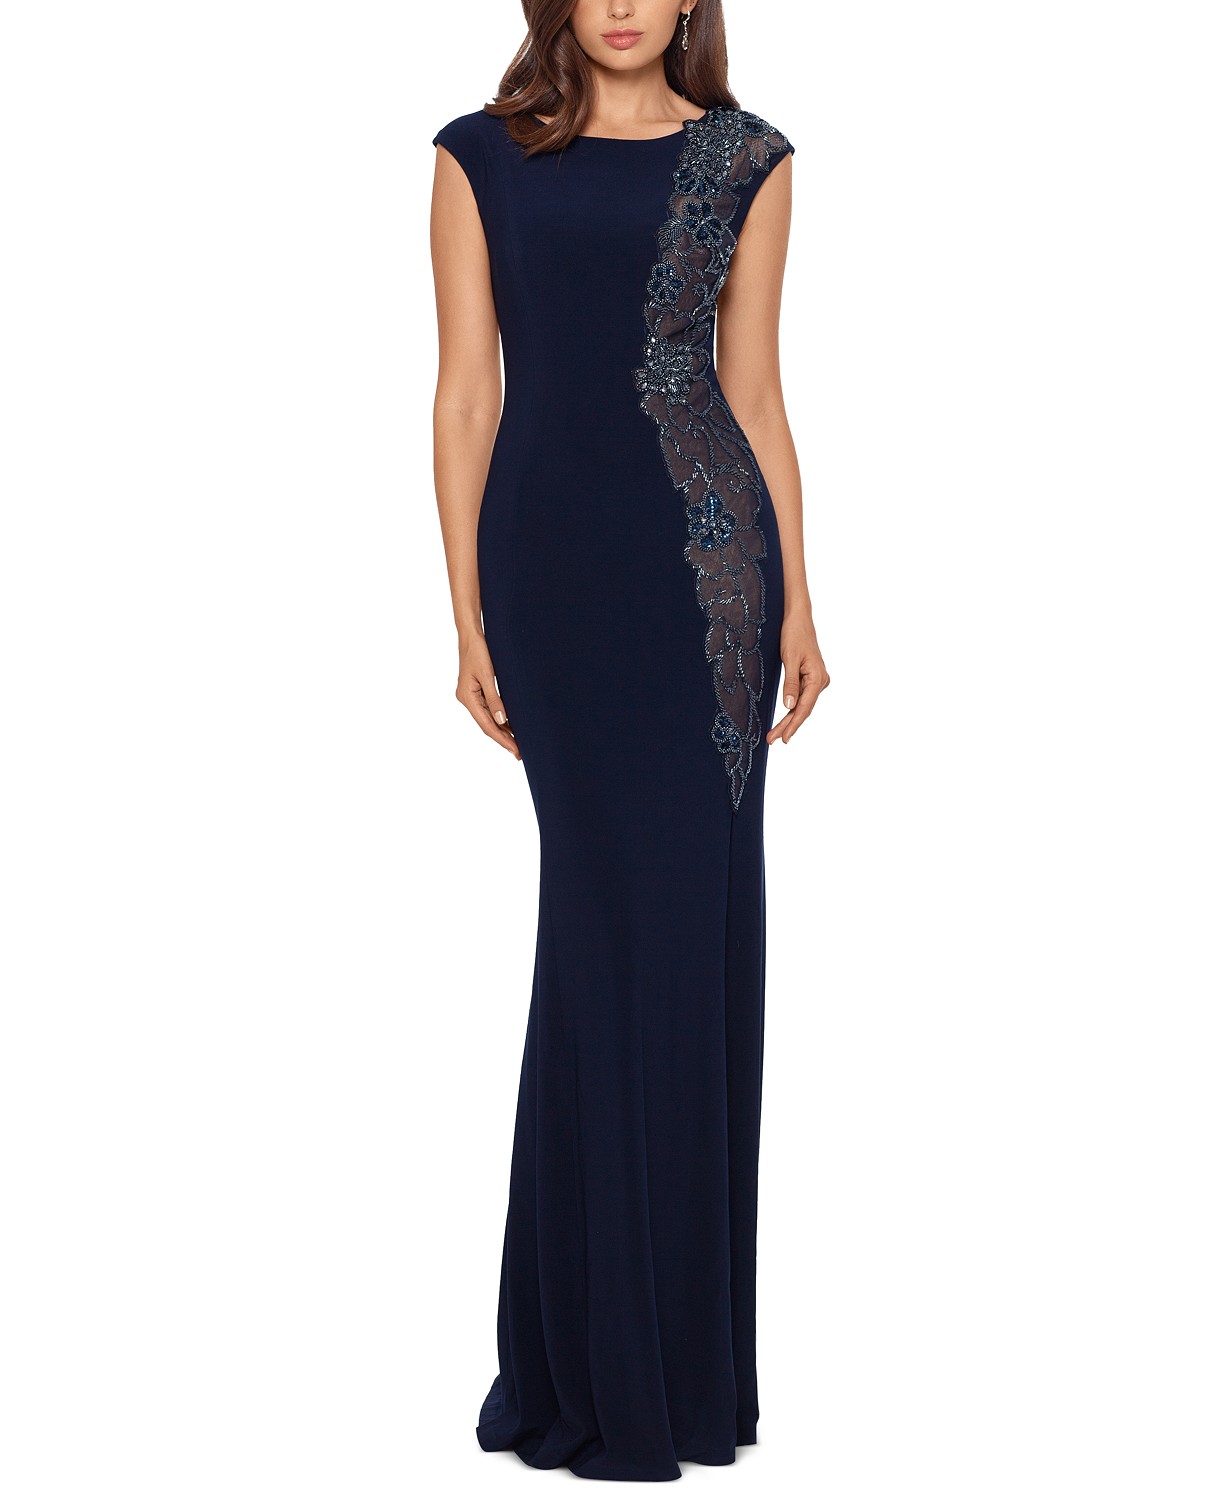 woocommerce-673321-2209615.cloudwaysapps.com-xscape-womens-petite-navy-embellished-lace-gown-dress